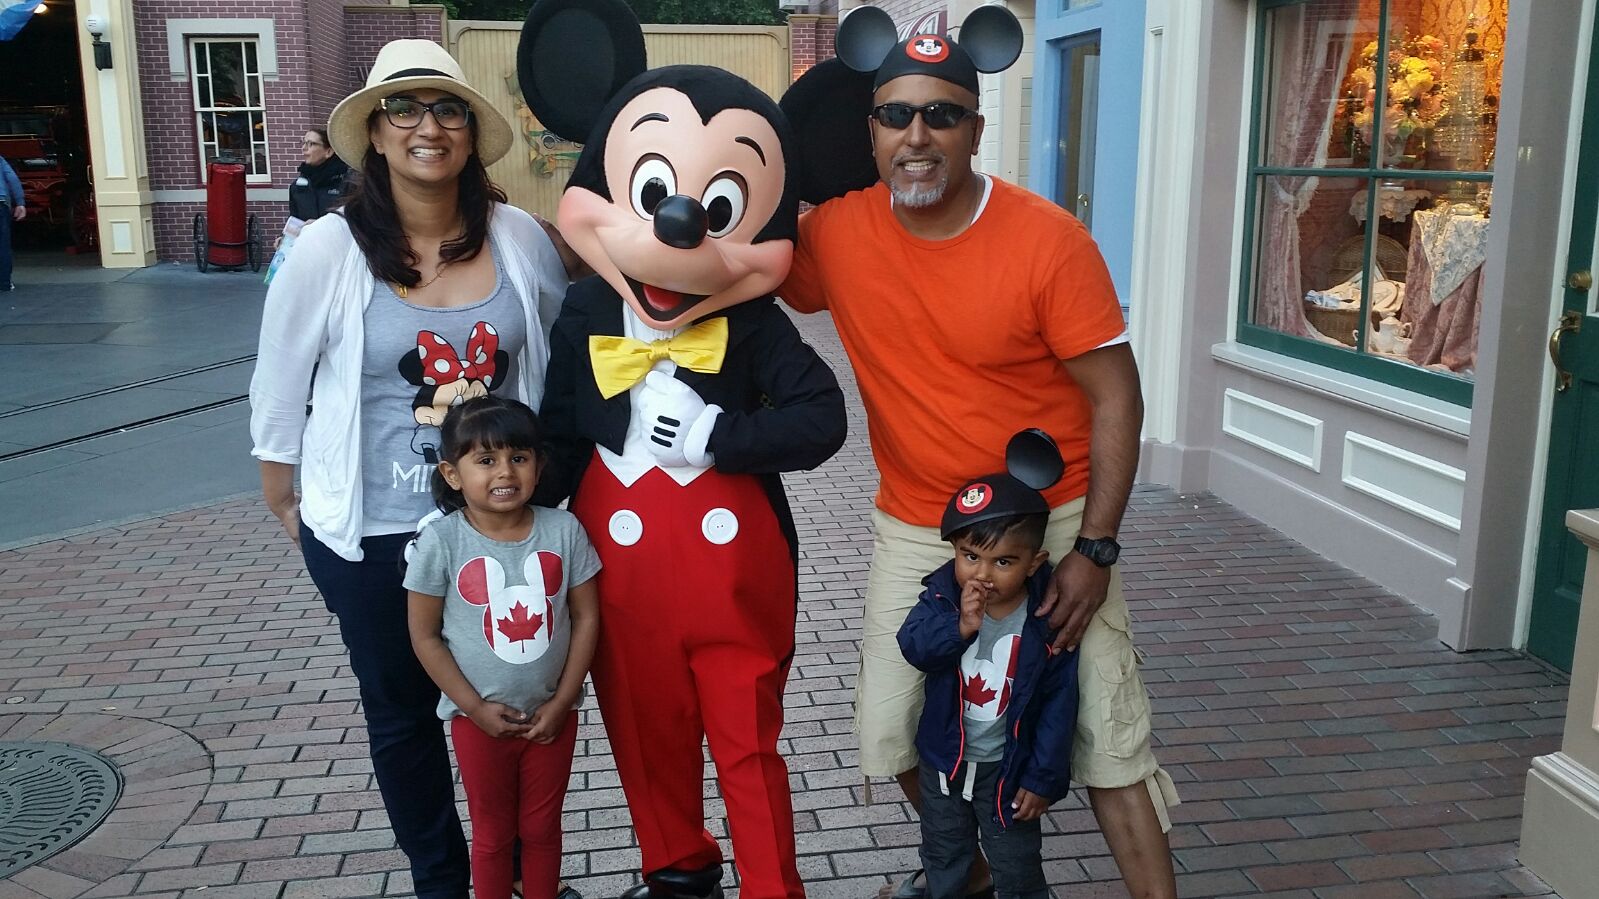 Sandy at Disney Land with her family